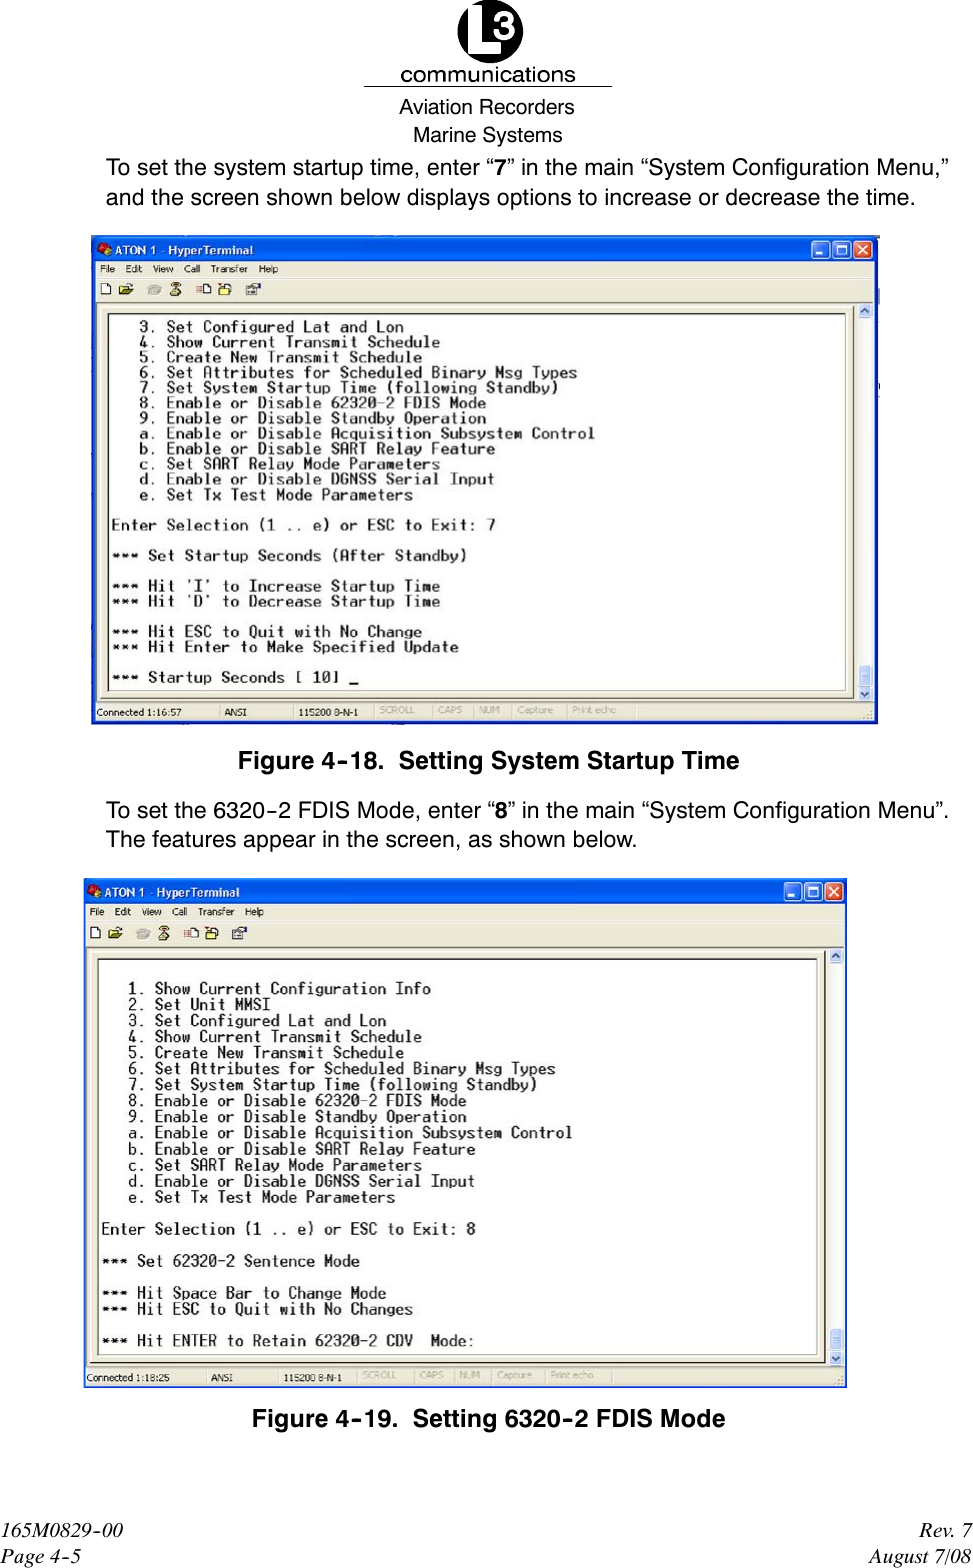 Marine SystemsAviation RecordersRev. 7August 7/08165M0829--00Page 4--5To set the system startup time, enter “7” in the main “System Configuration Menu,”and the screen shown below displays options to increase or decrease the time.Figure 4--18. Setting System Startup TimeTo set the 6320--2 FDIS Mode, enter “8” in the main “System Configuration Menu”.The features appear in the screen, as shown below.Figure 4--19. Setting 6320--2 FDIS Mode